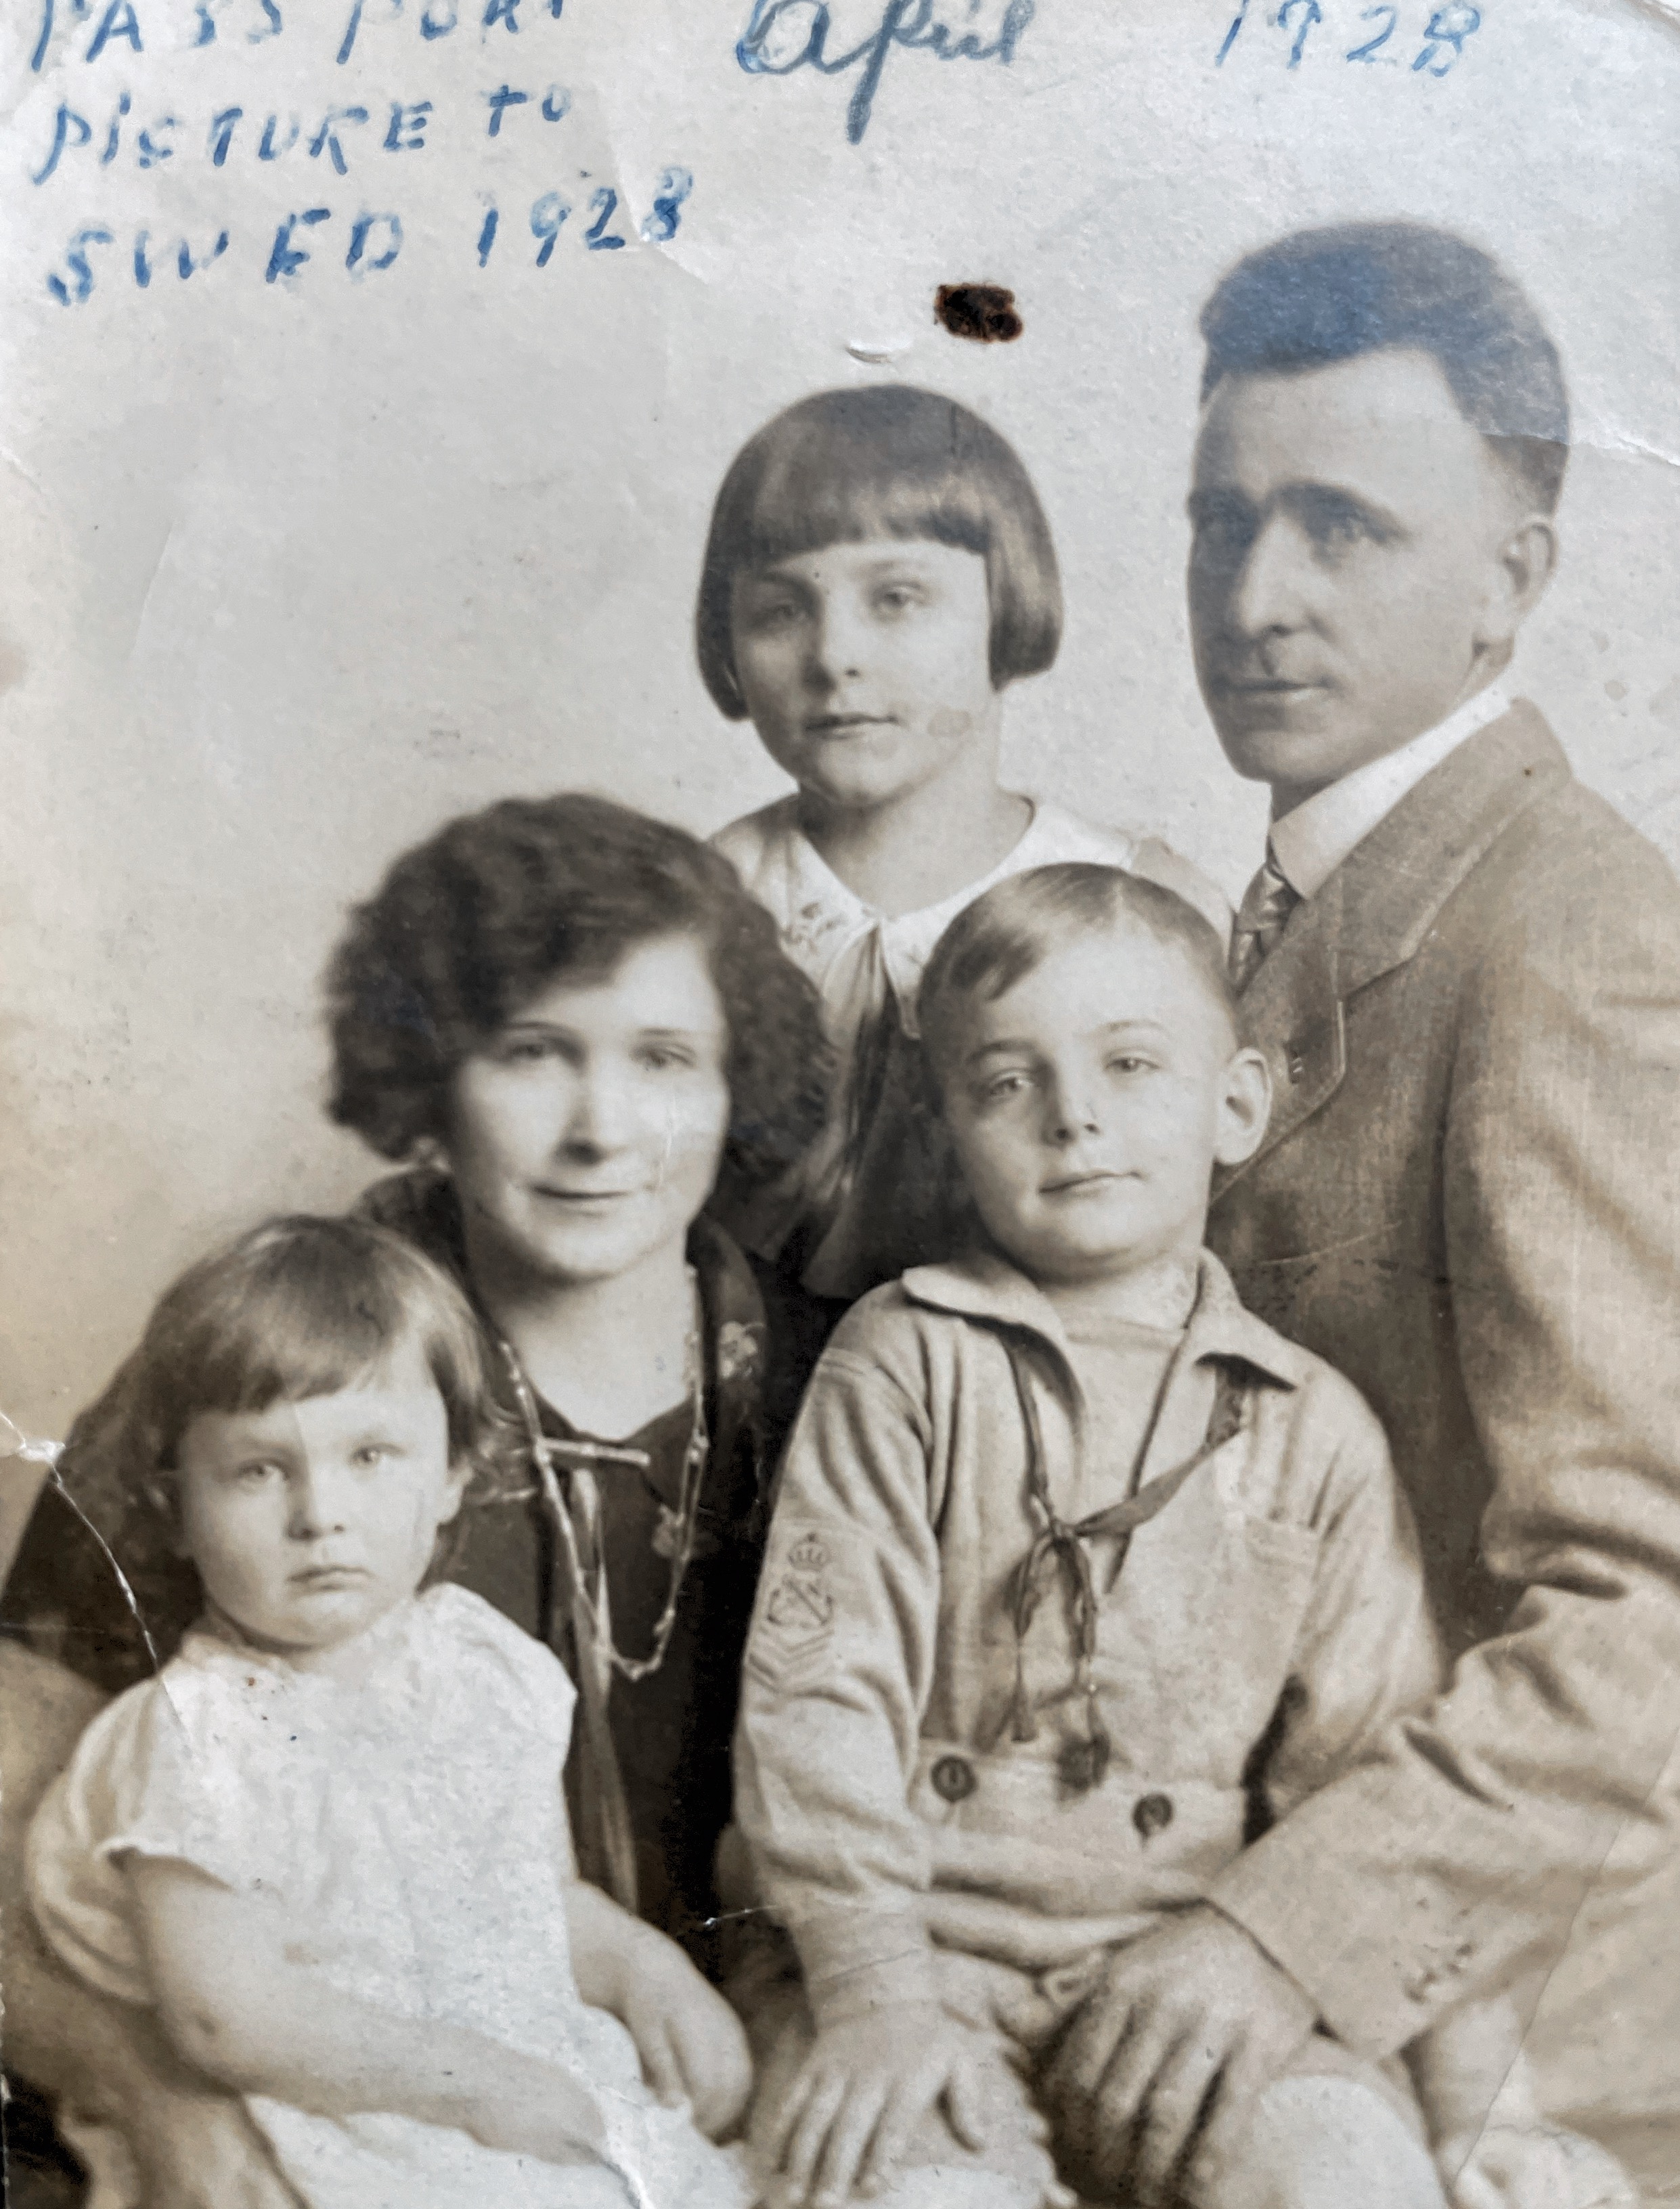 Grandparents, my mother and her siblings - passport photo 1938